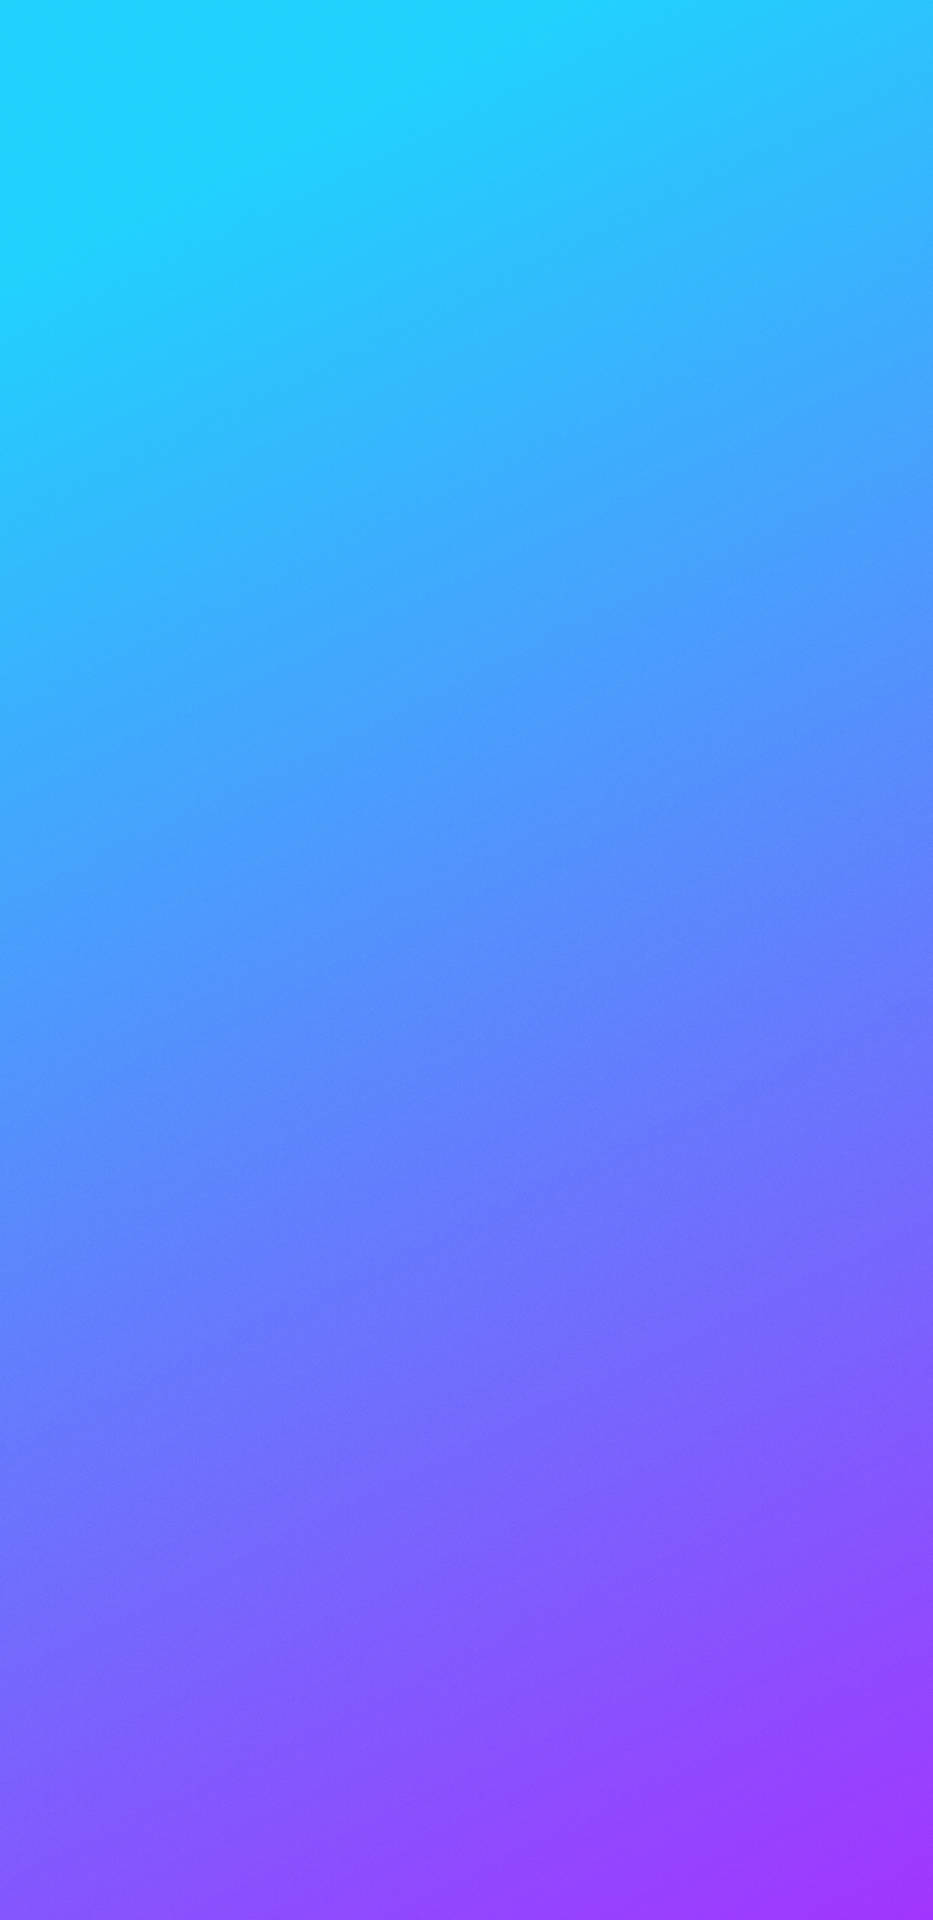 Solid Dark Blue And Purple Gradient Picture